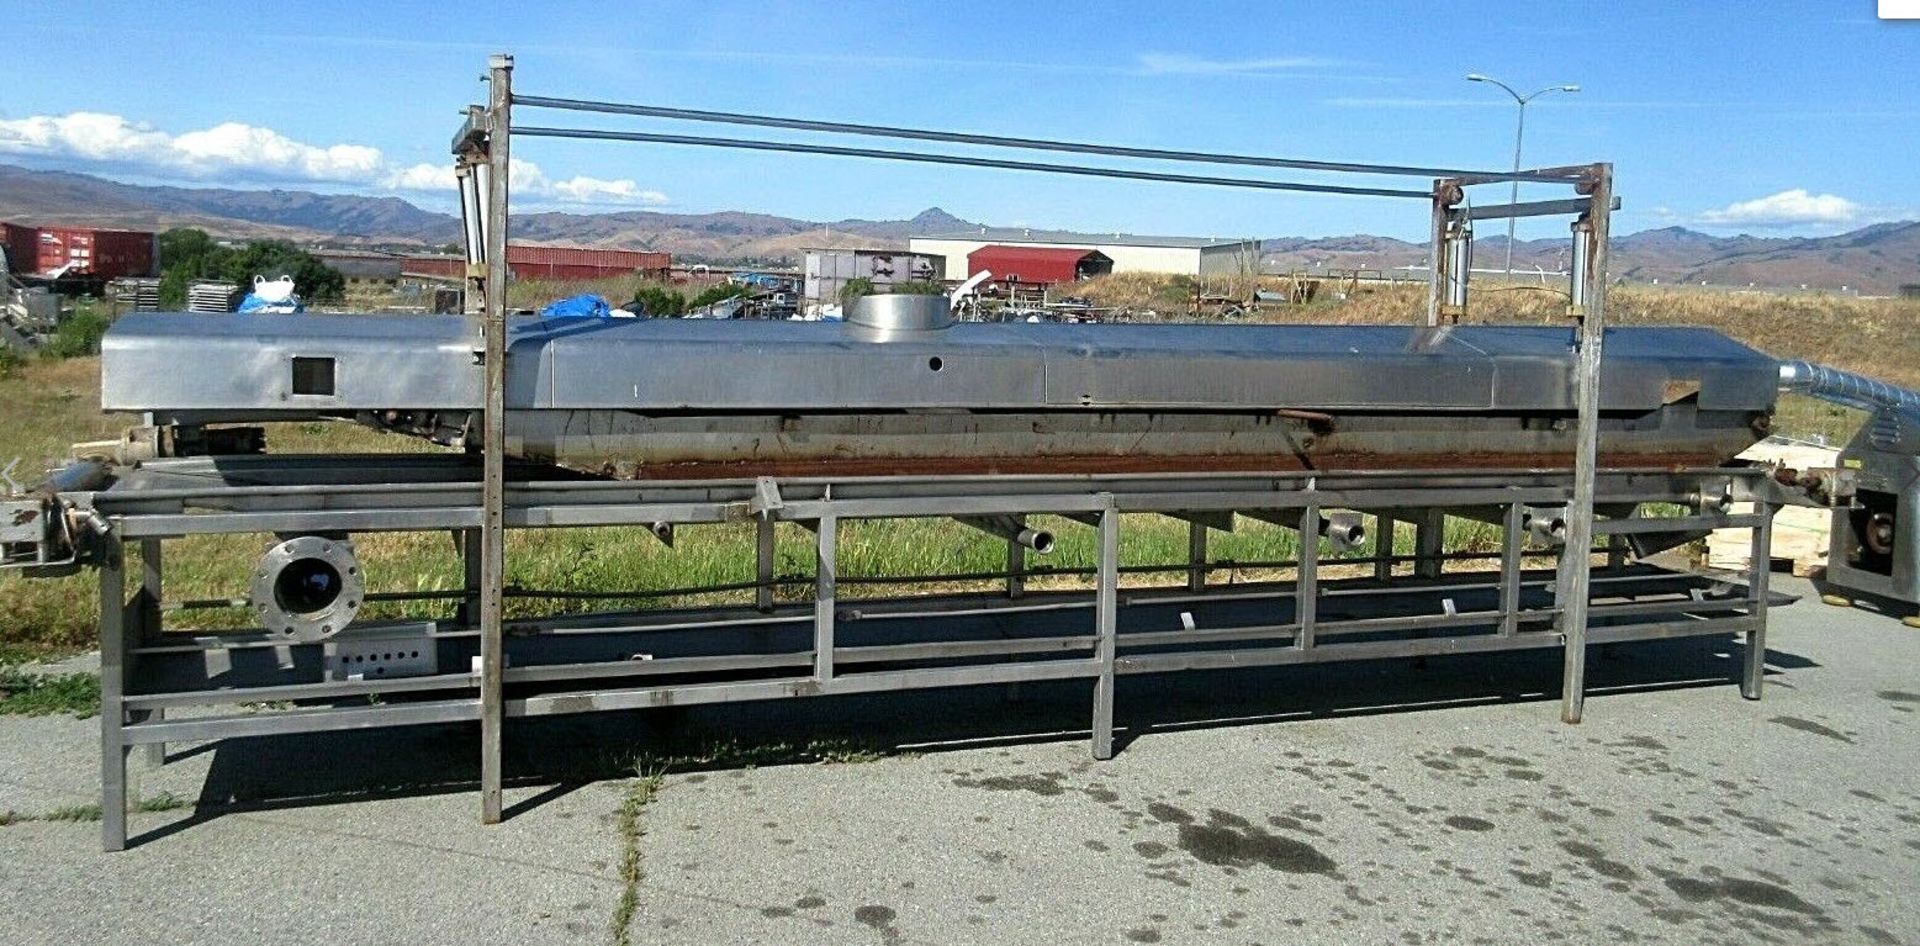 (Located in Hollister, CA) Industrial Oil Roaster, Rigging Fee: $100